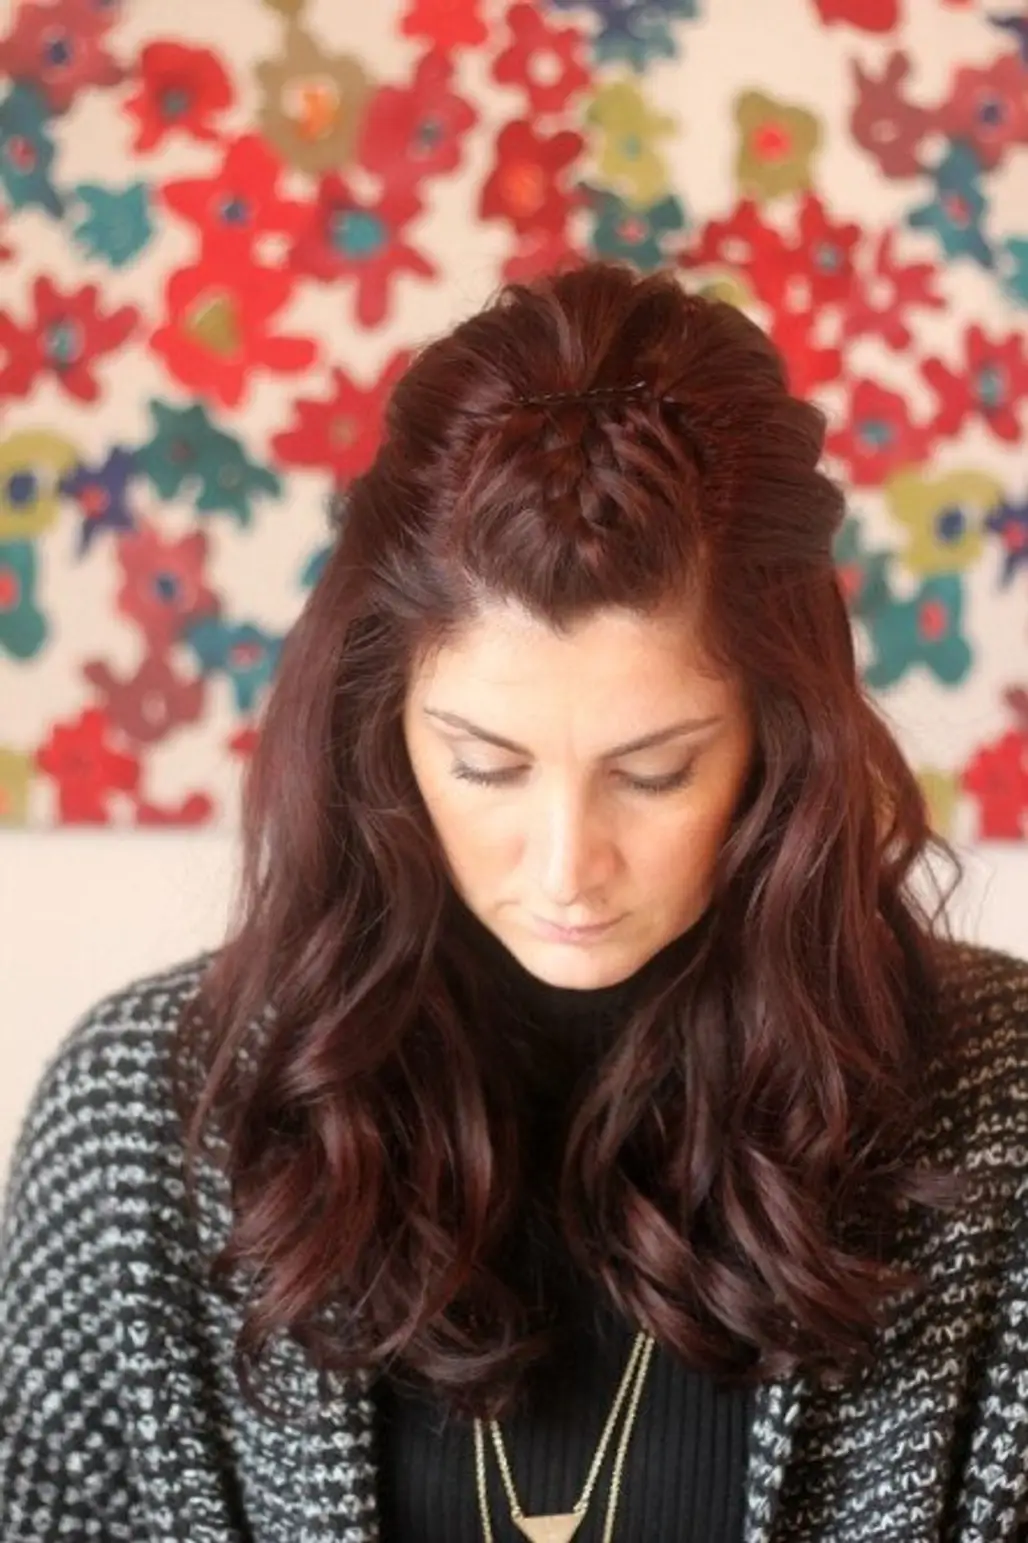 hair,human hair color,face,red,hairstyle,